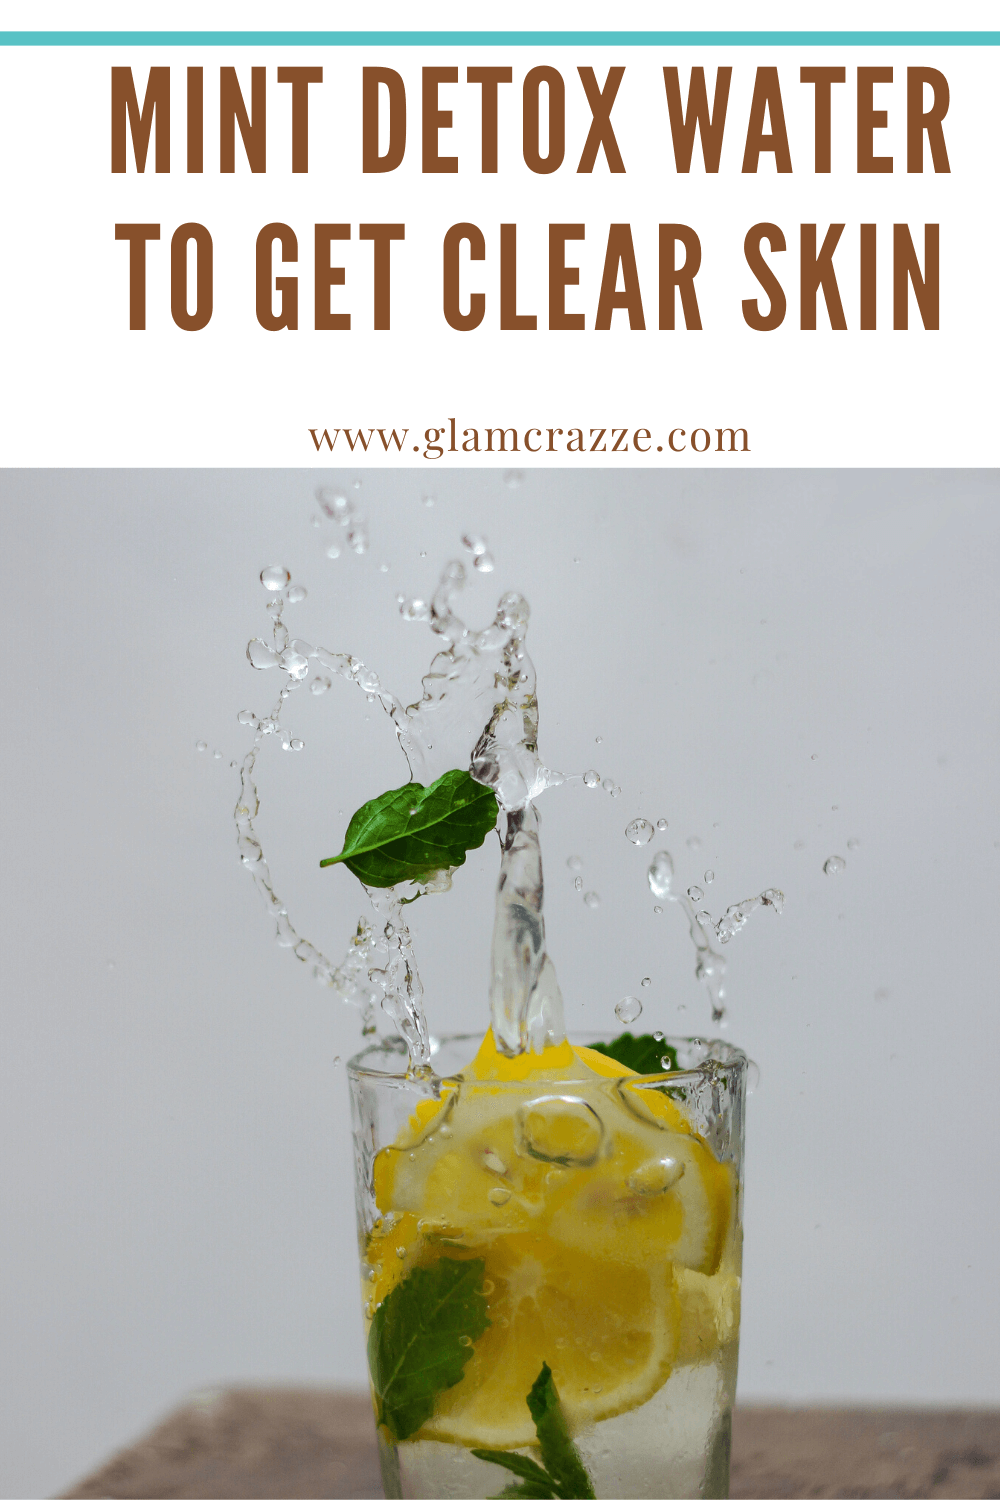 Consume 2 cups of mint water to get clear skin at home remedies